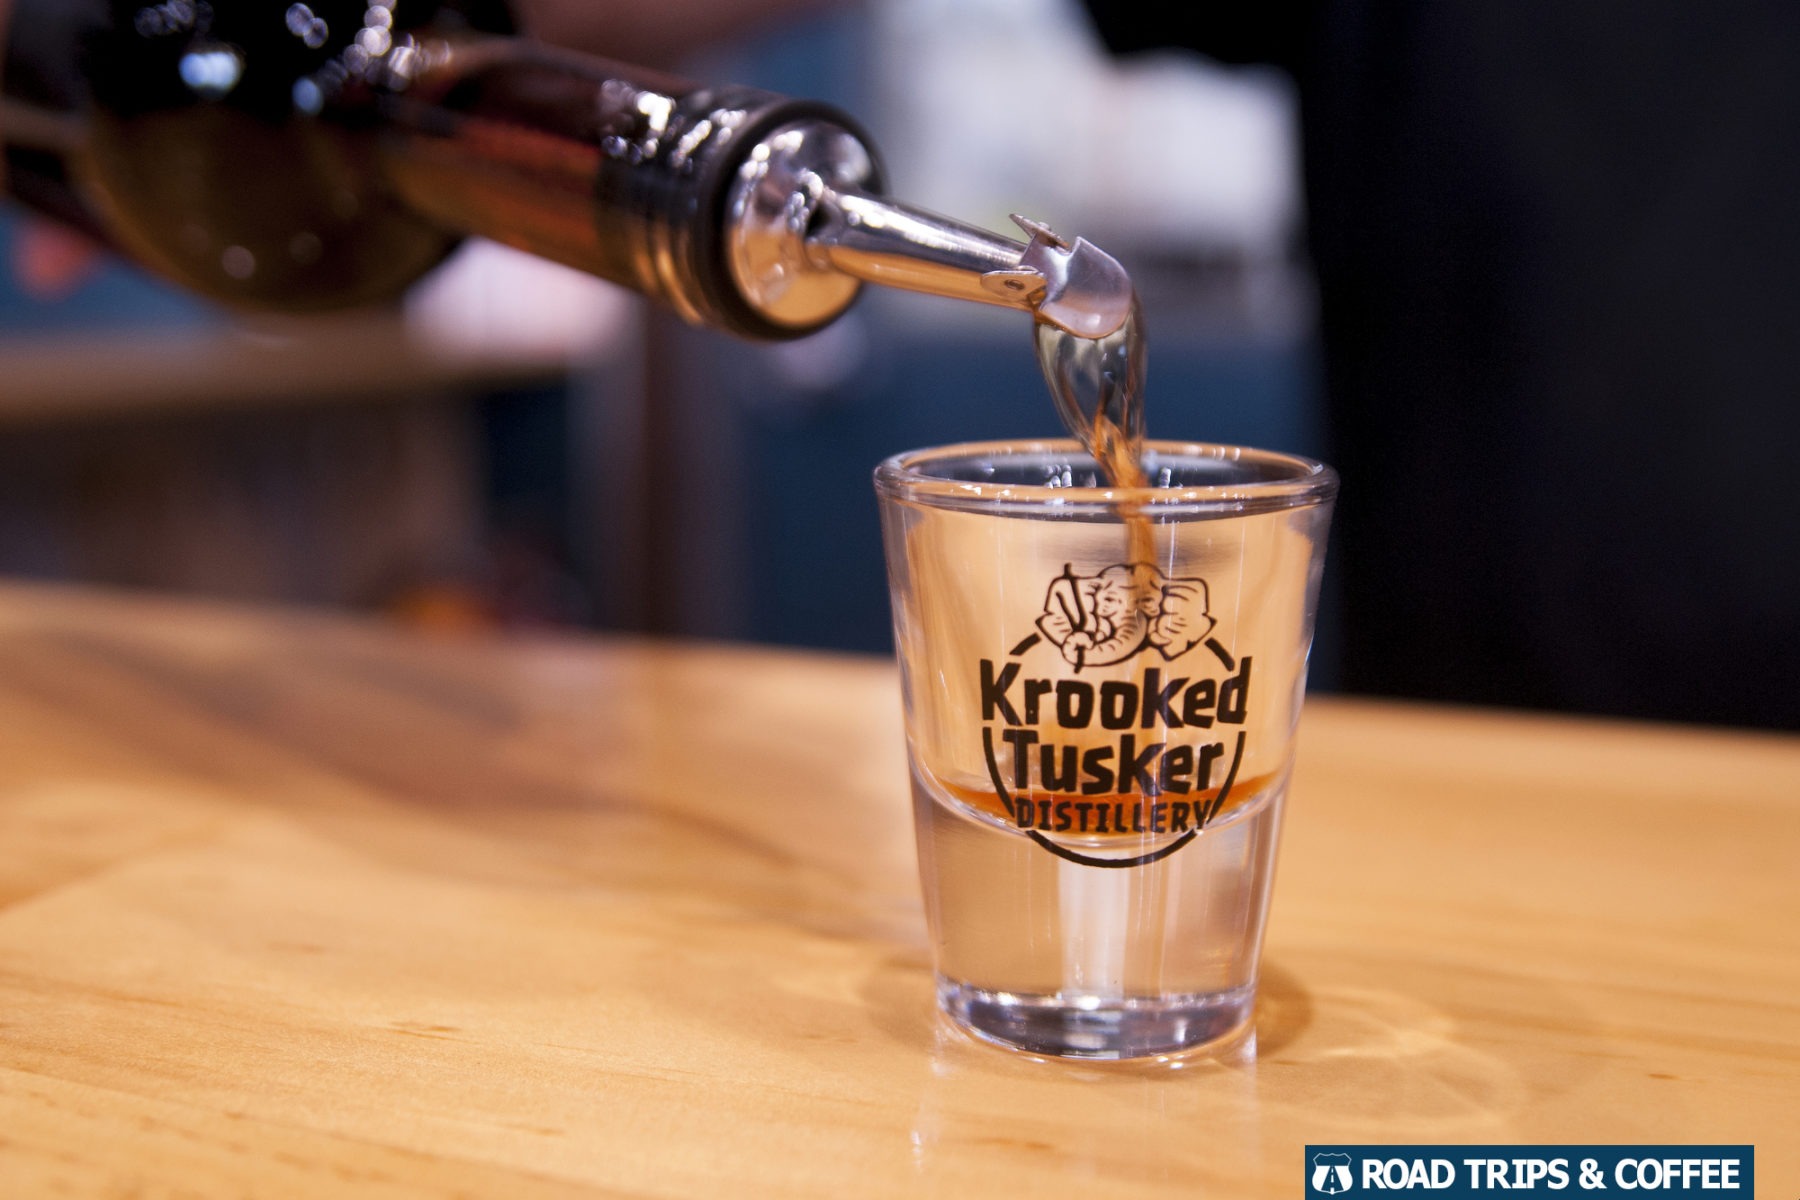 Pouring a shot of bourbon into a sample glass at the Krooked Tusker Distillery in Hammondsport, New York